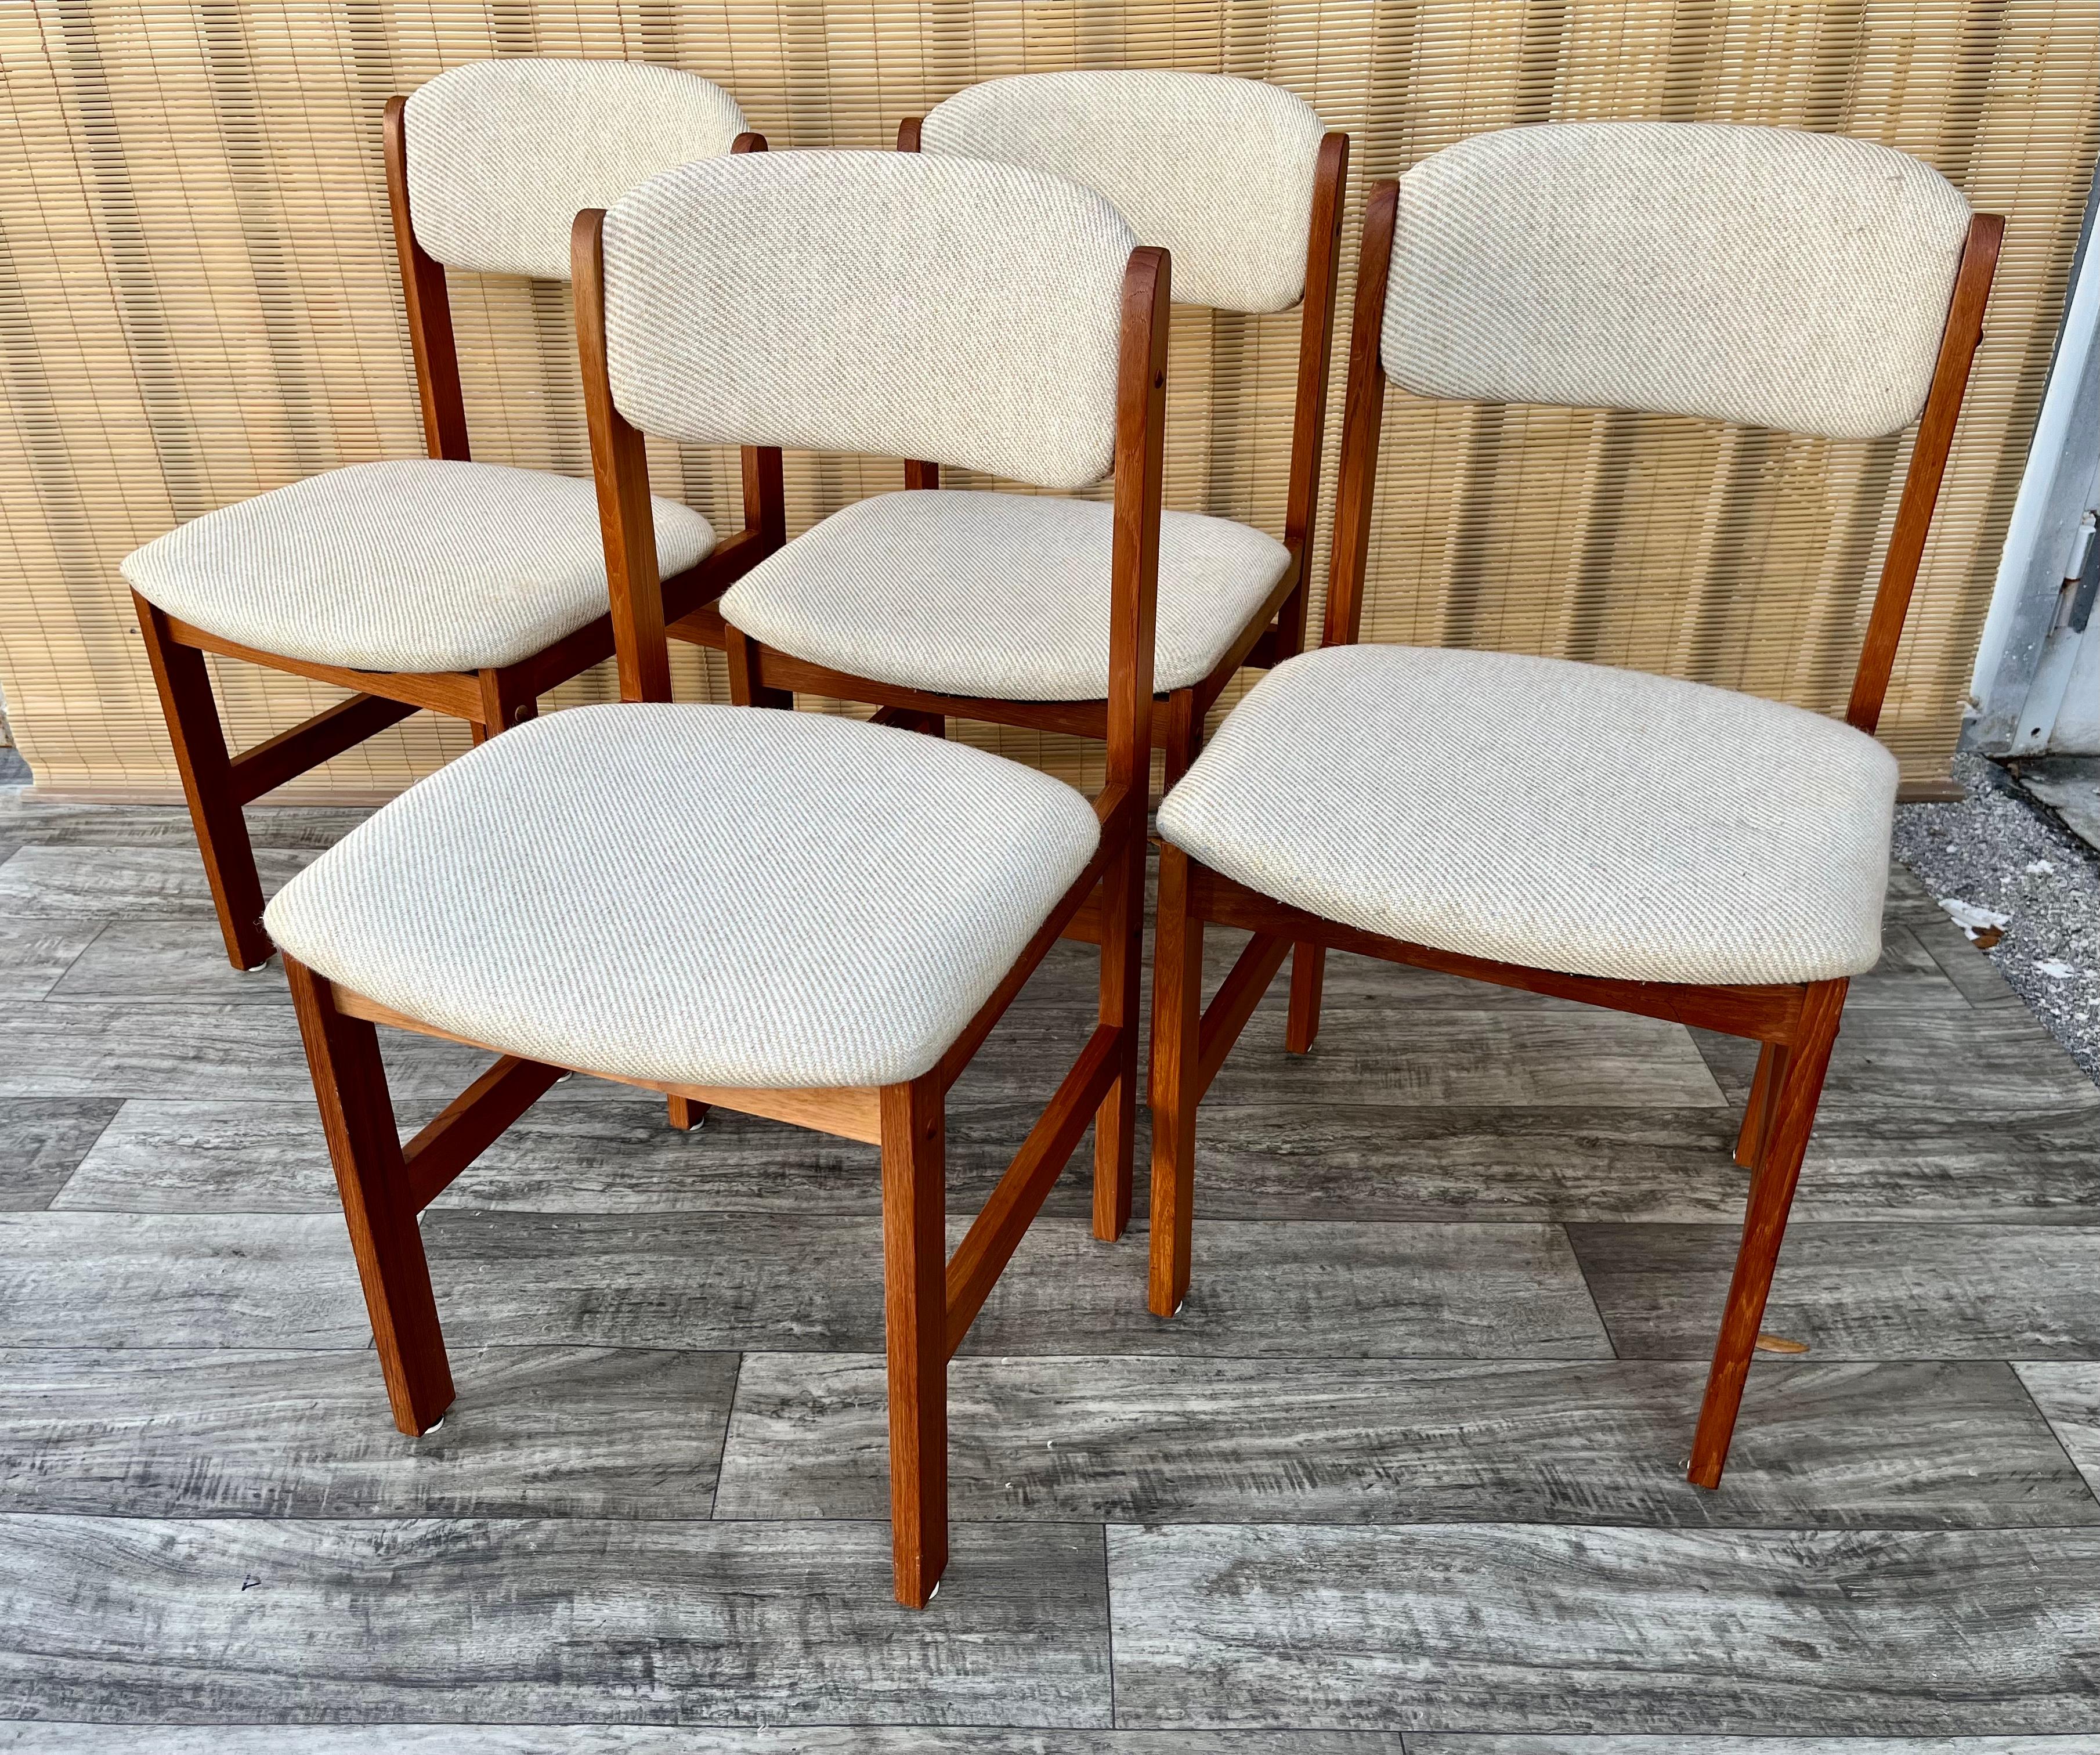 A set of four Vintage Mid-Century Danish Modern Style Dining Chairs by Benny Linden Design. C. 1980s 
Feature a solid teak frame in a minimalist Scandinavian Modern Design, and upholstered seats and back rests with the origin cream color fabric.